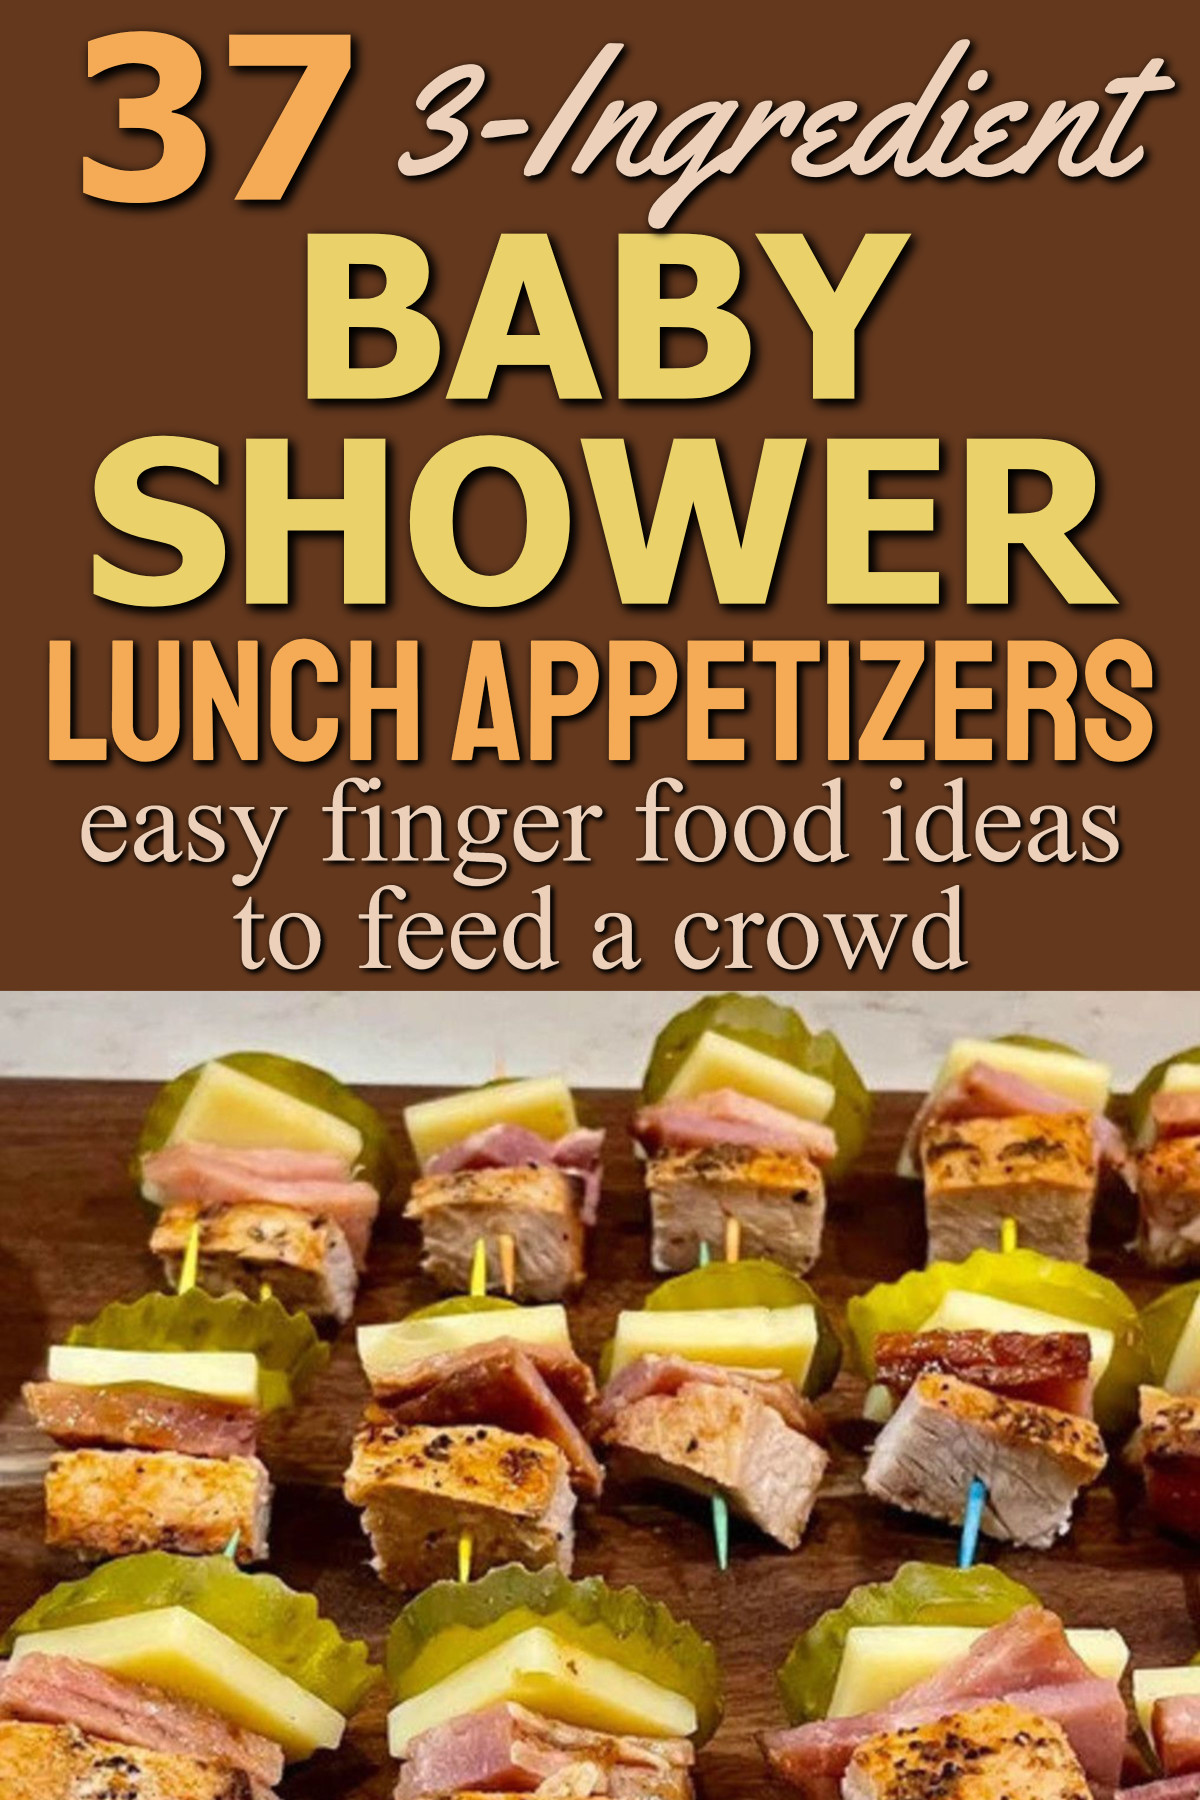 3-Ingredient Baby shower lunch appetizers easy finger food ideas to feed a crowd